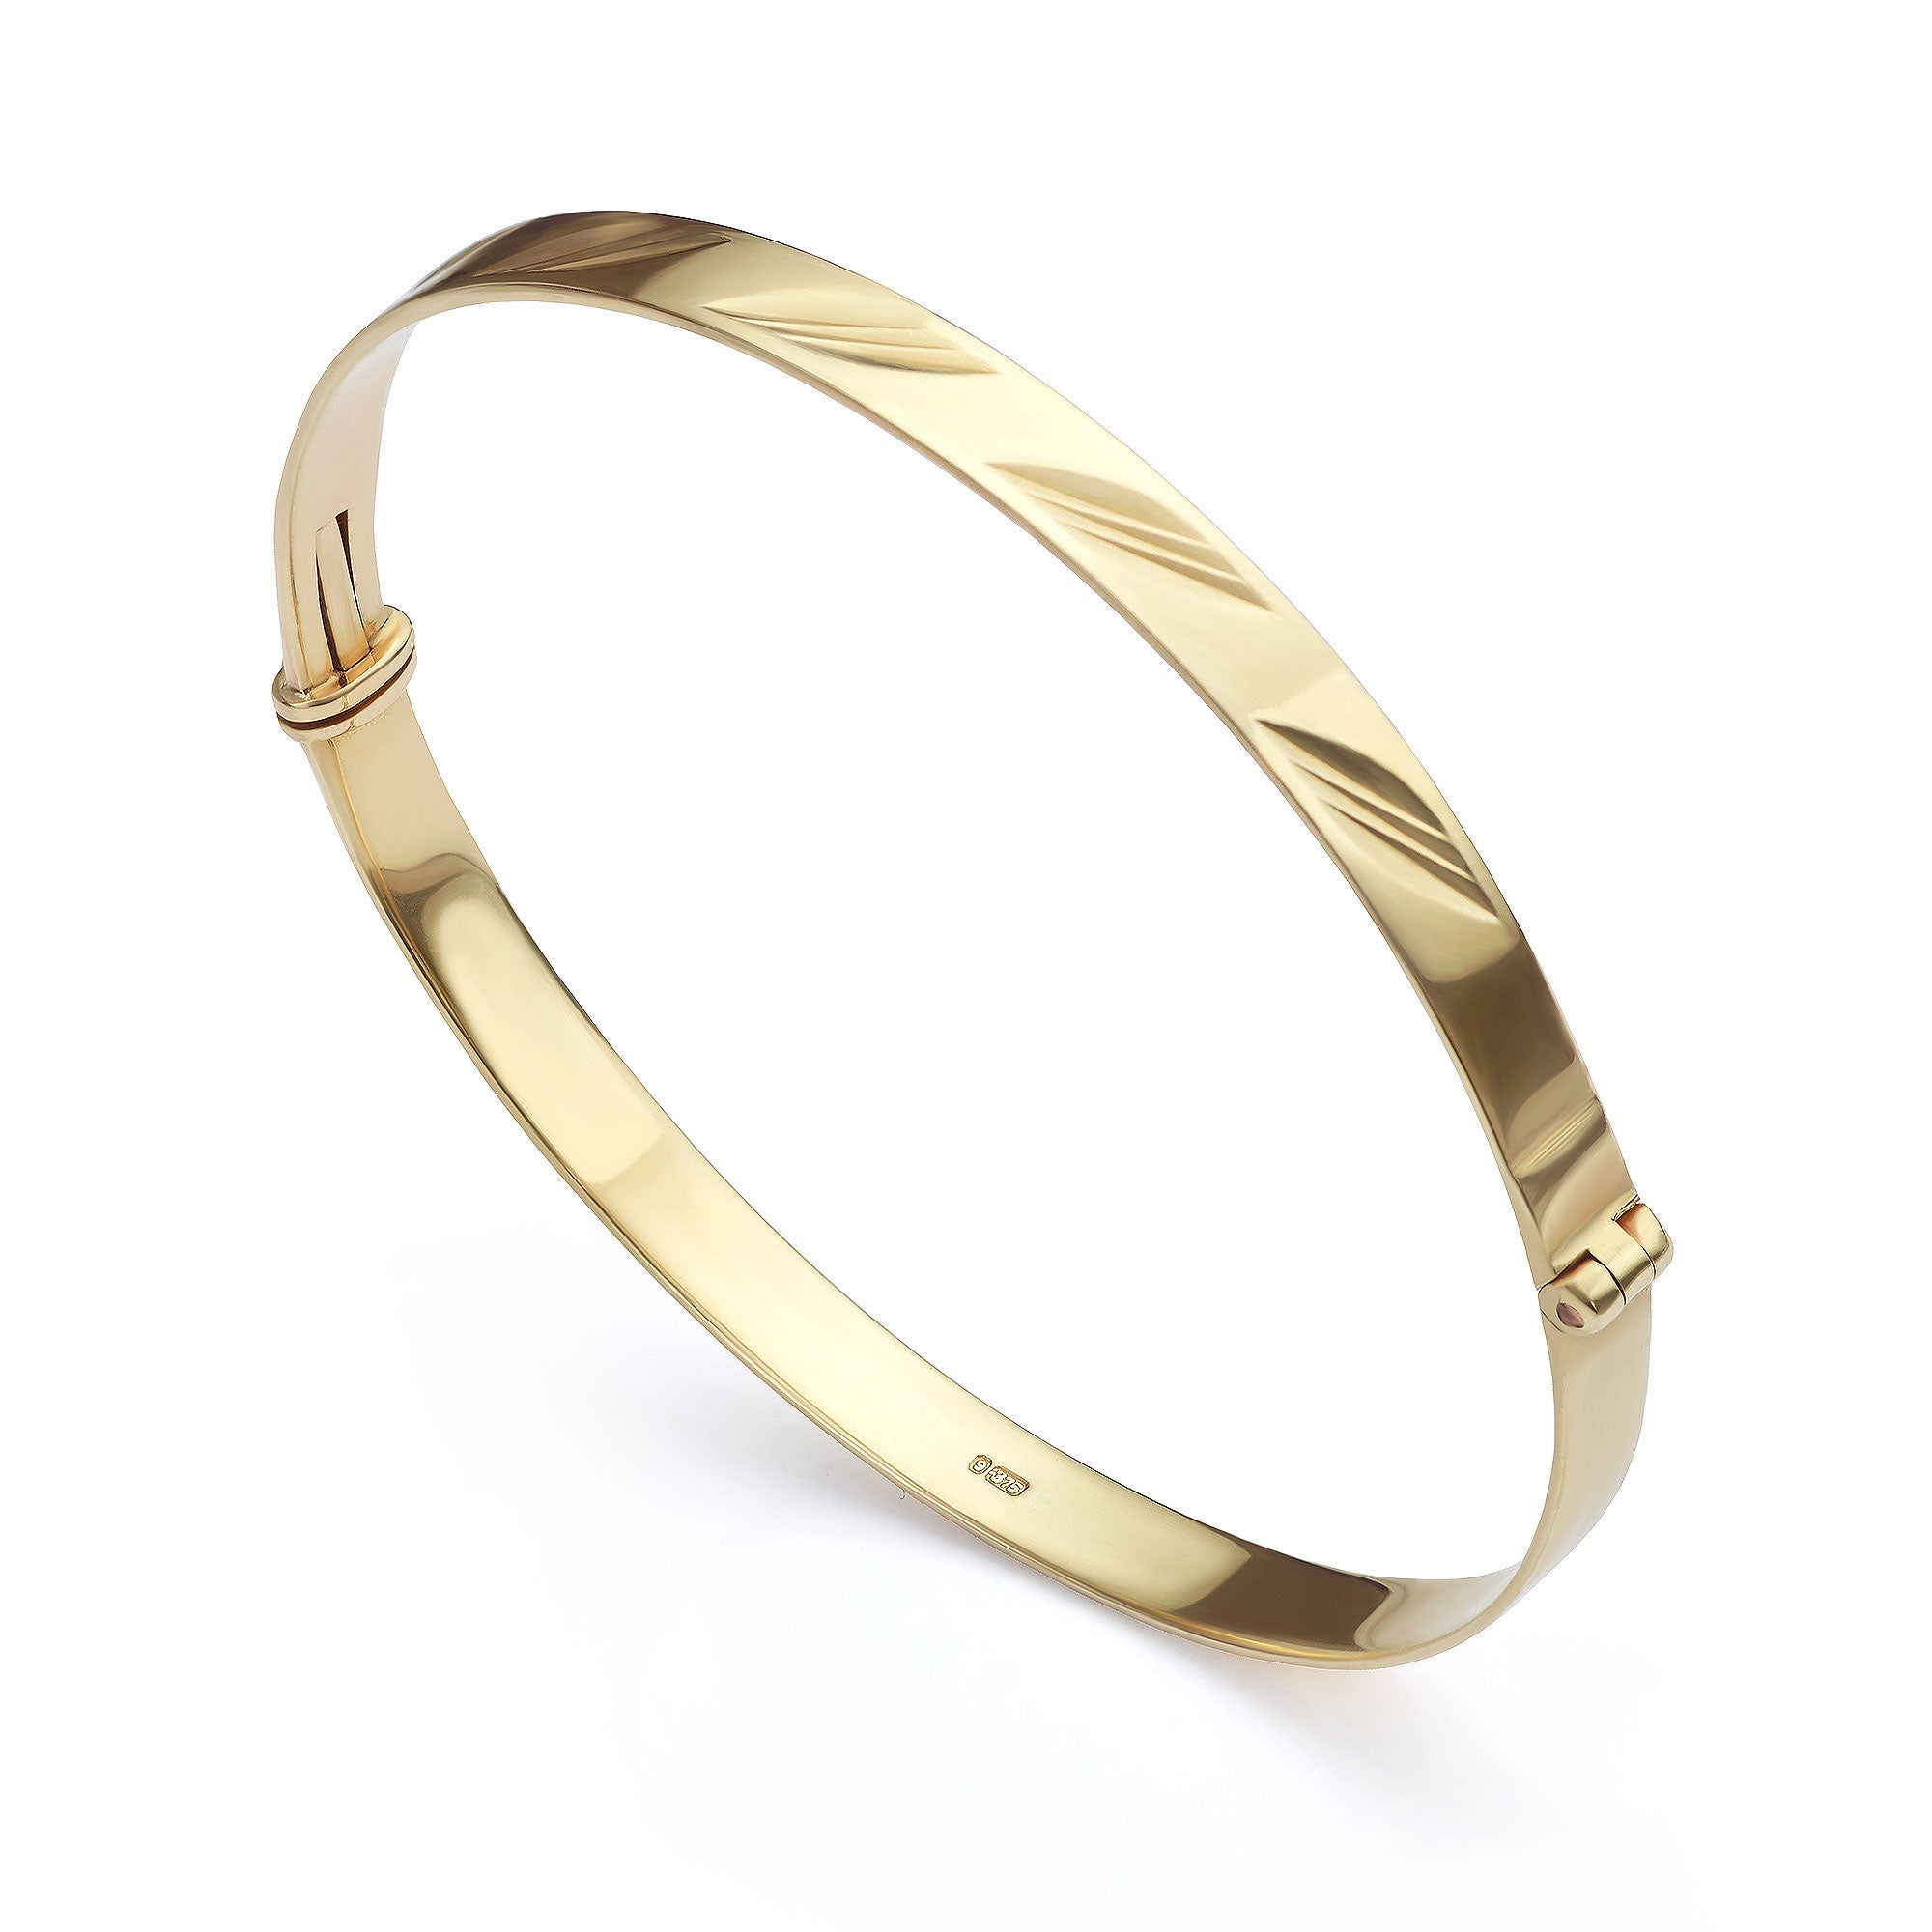 Pre-owned 9 carat yellow gold bangle